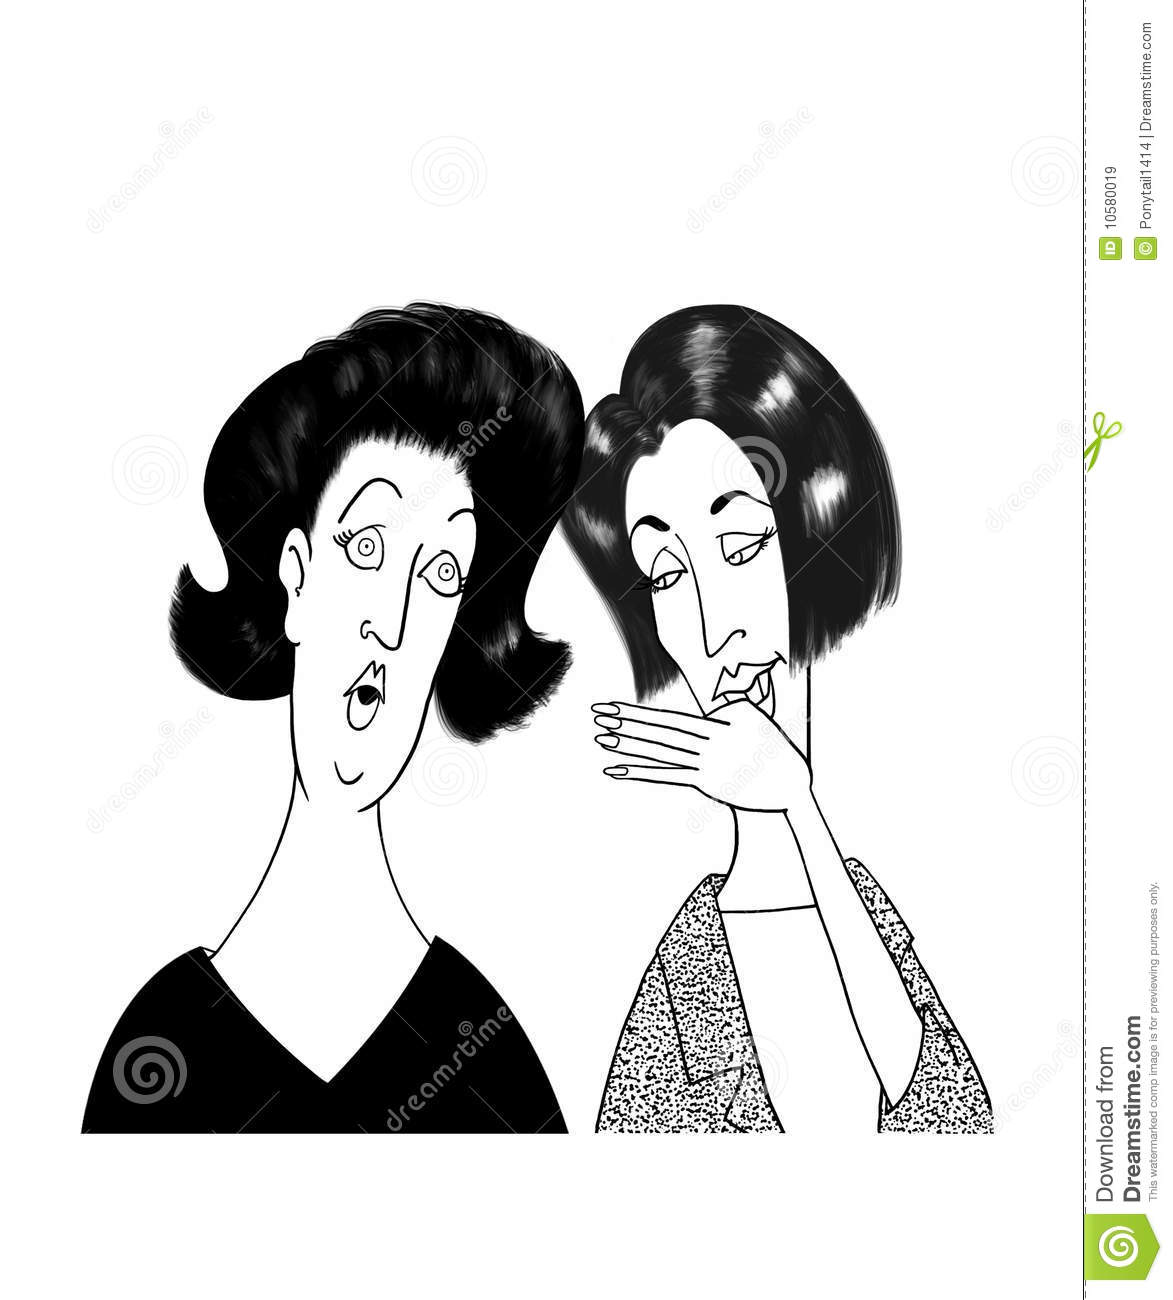     Of Woman Reacting In Shock To A Piece Of Gossip Mr No Pr No 4 1336 10